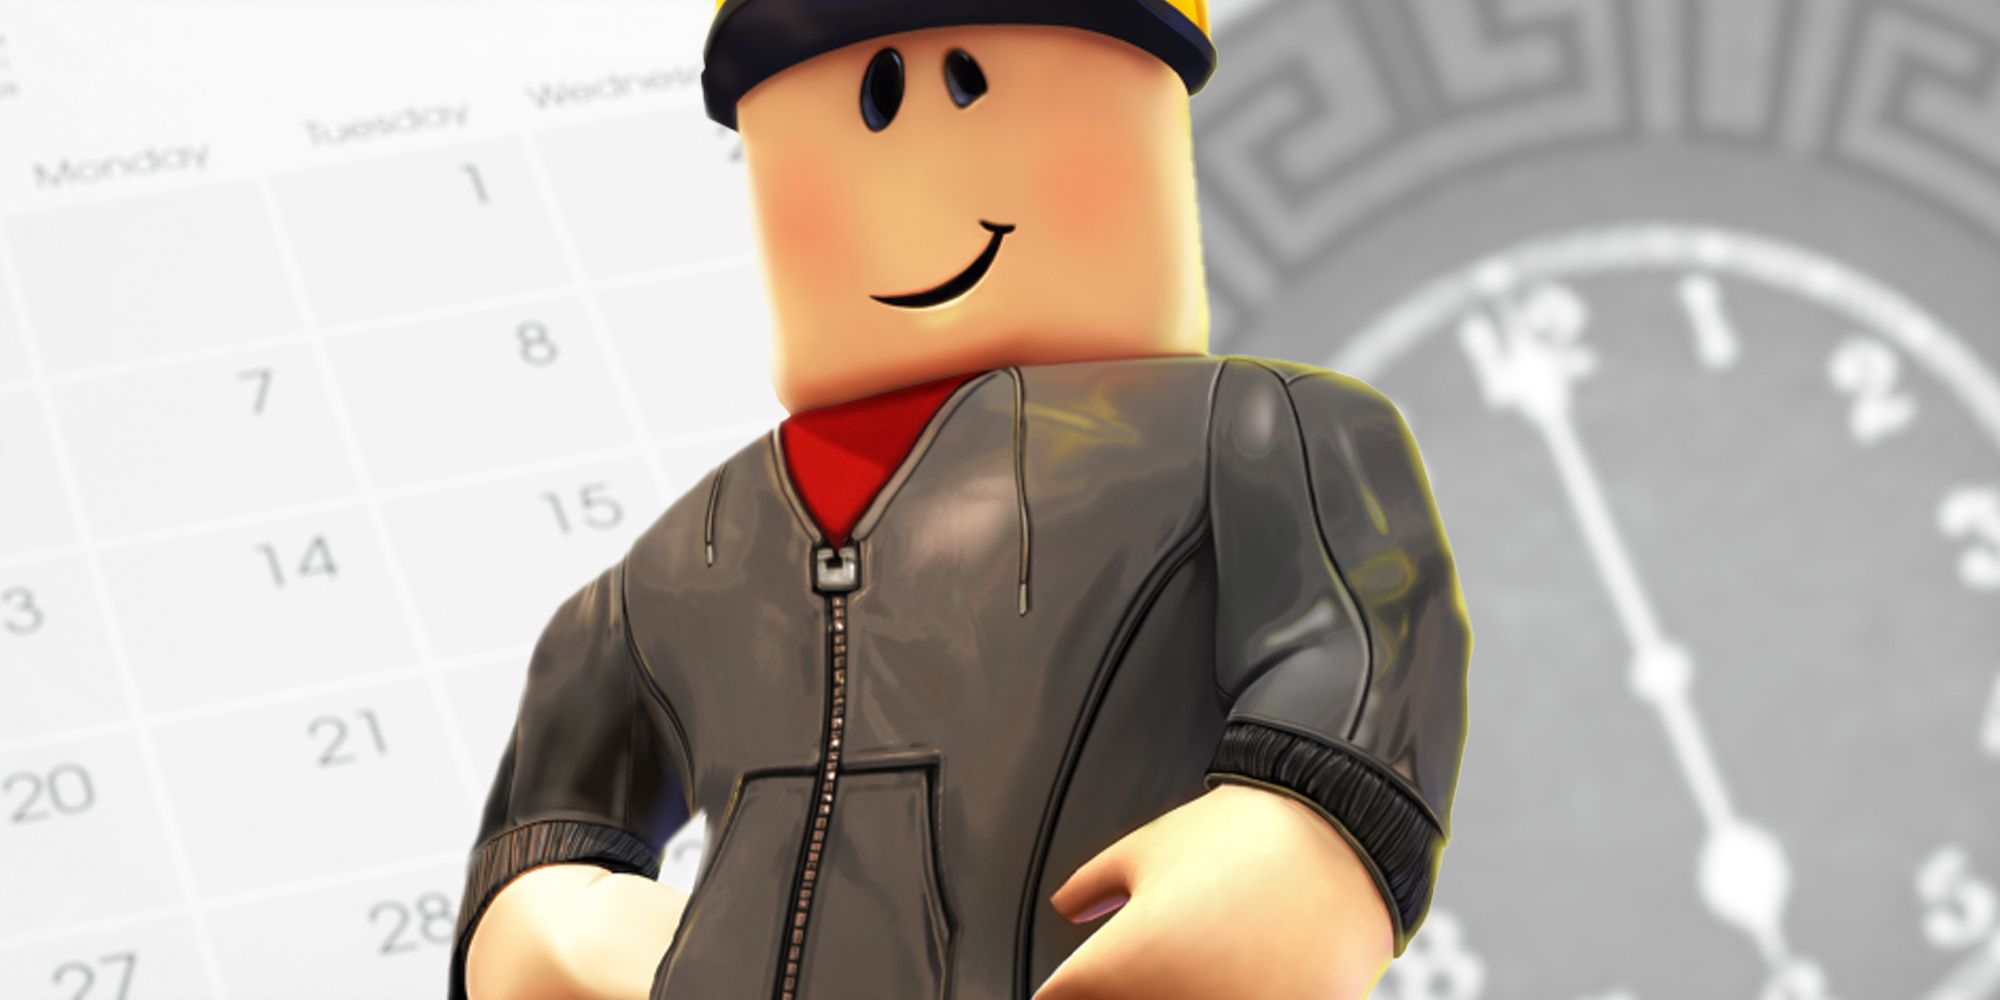 Who is Builderman on Roblox? 